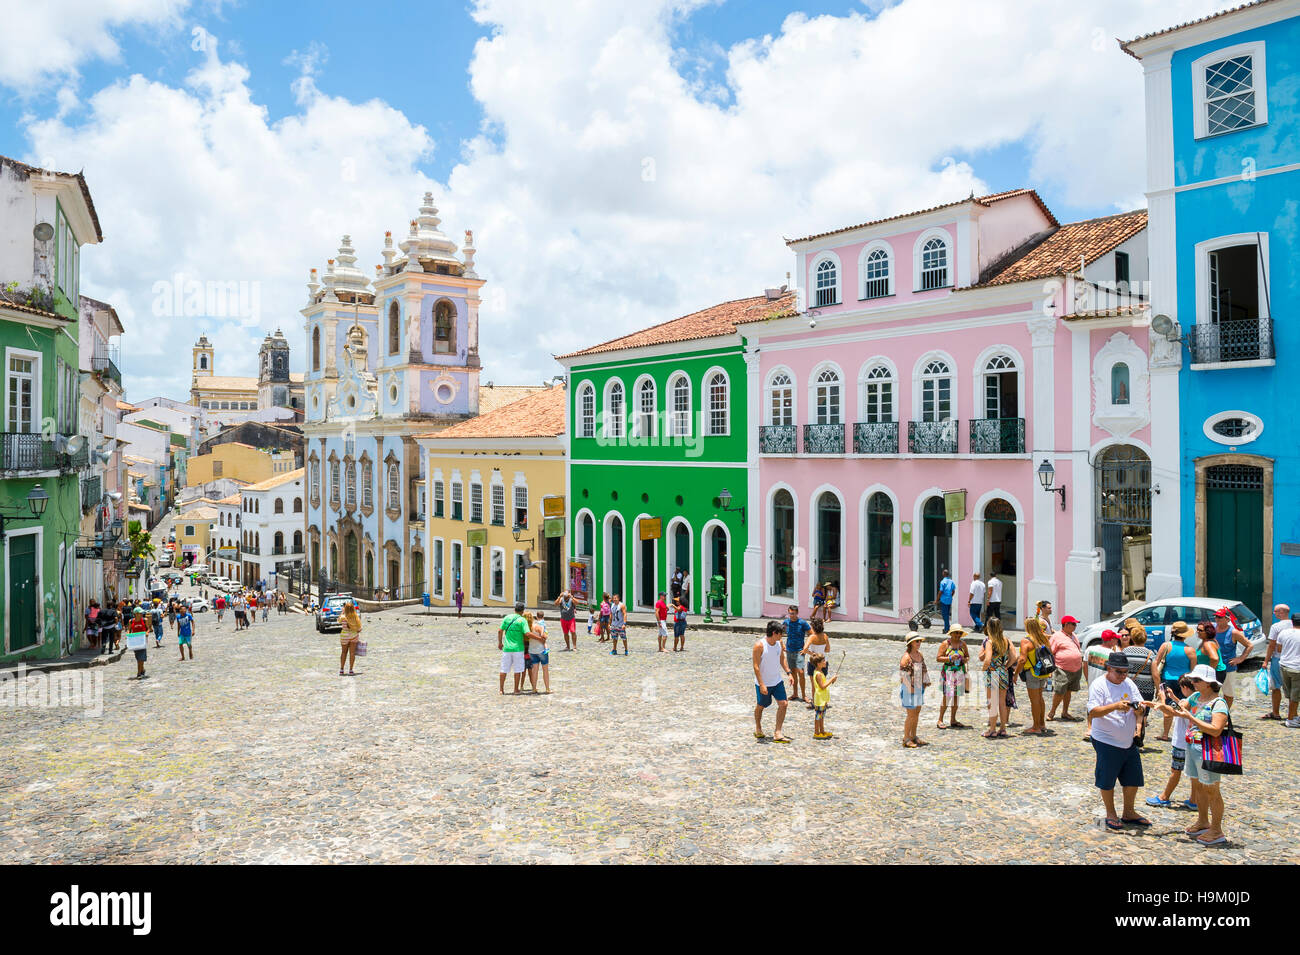 SALVADOR, BRAZIL - MARCH 12, 2015: Visitors pass through the traditional plaza surrounded by colonial buildings in Pelourinho. Stock Photo